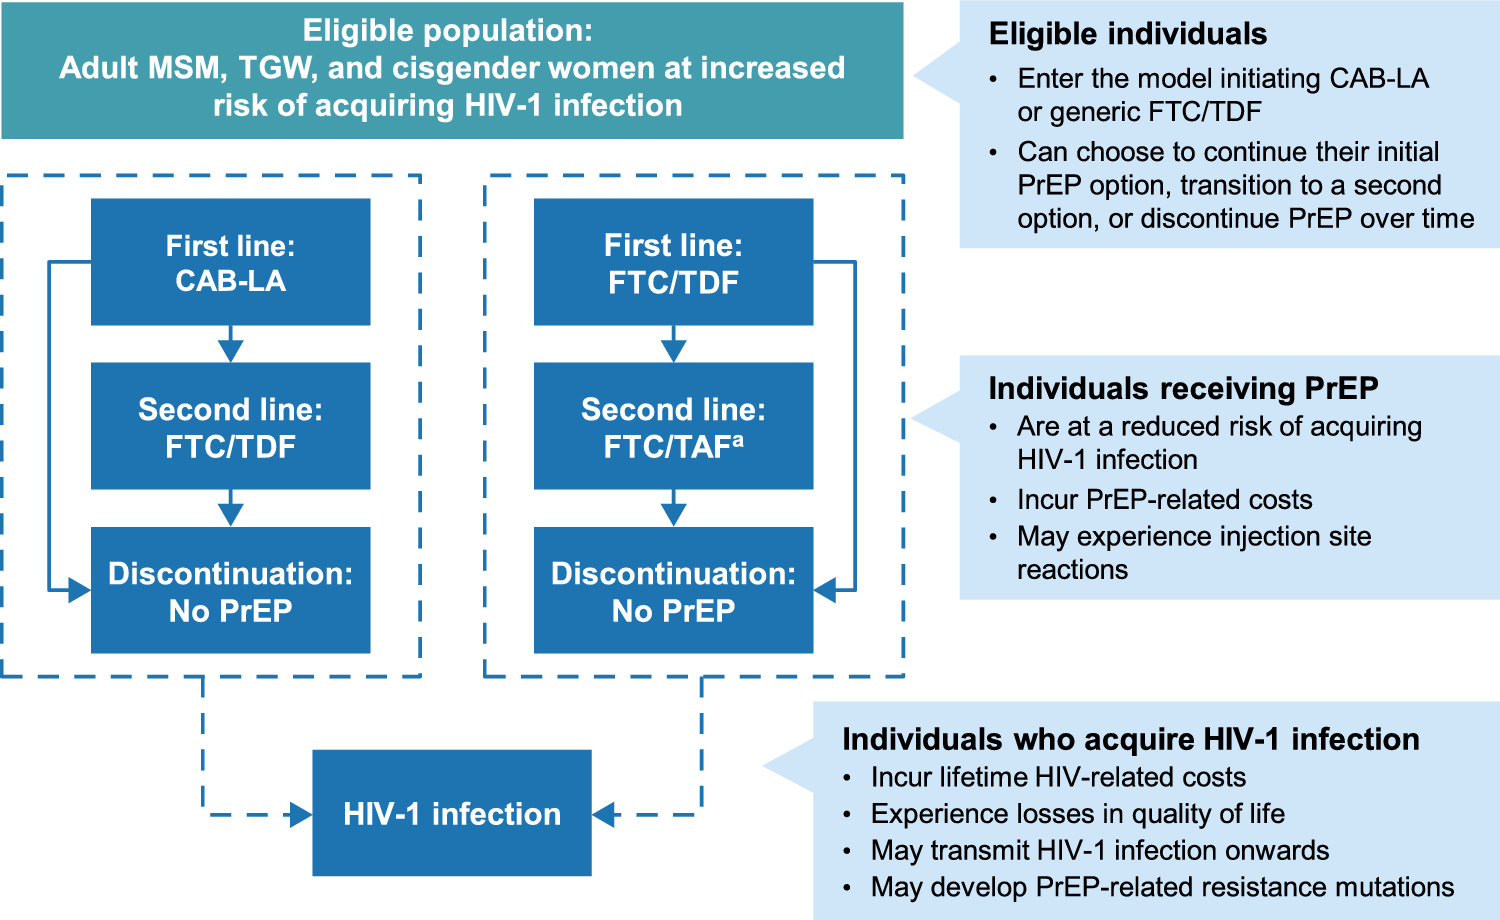 Cost-effectiveness of Cabotegravir Long-Acting for HIV Pre-exposure Prophylaxis in the United States